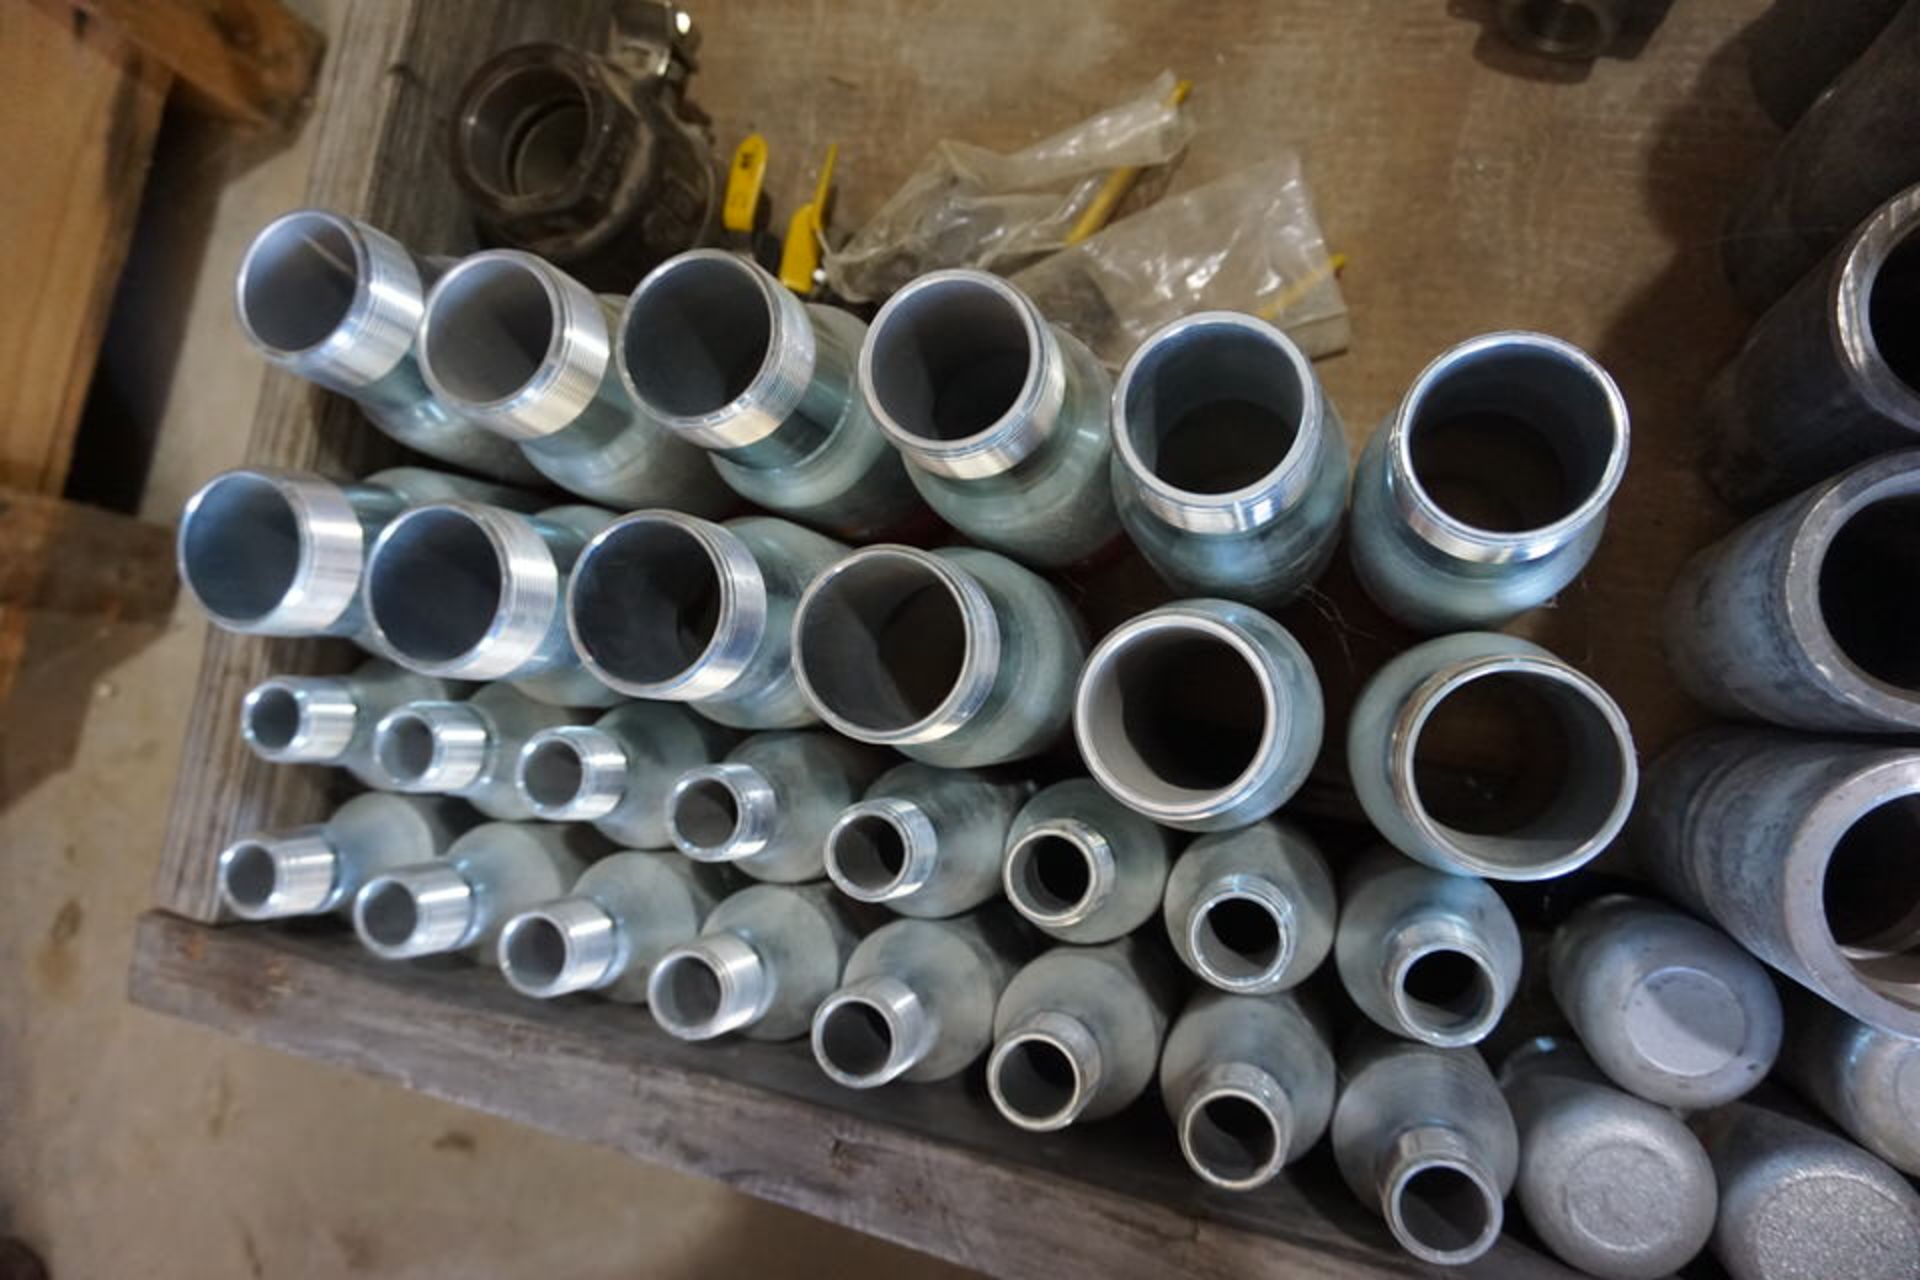 PIPE NIPPLES, T'S, L'S, BULLET PLUGS, SWAGE NIPPLES, 6" TANK FLANGES - Image 2 of 5